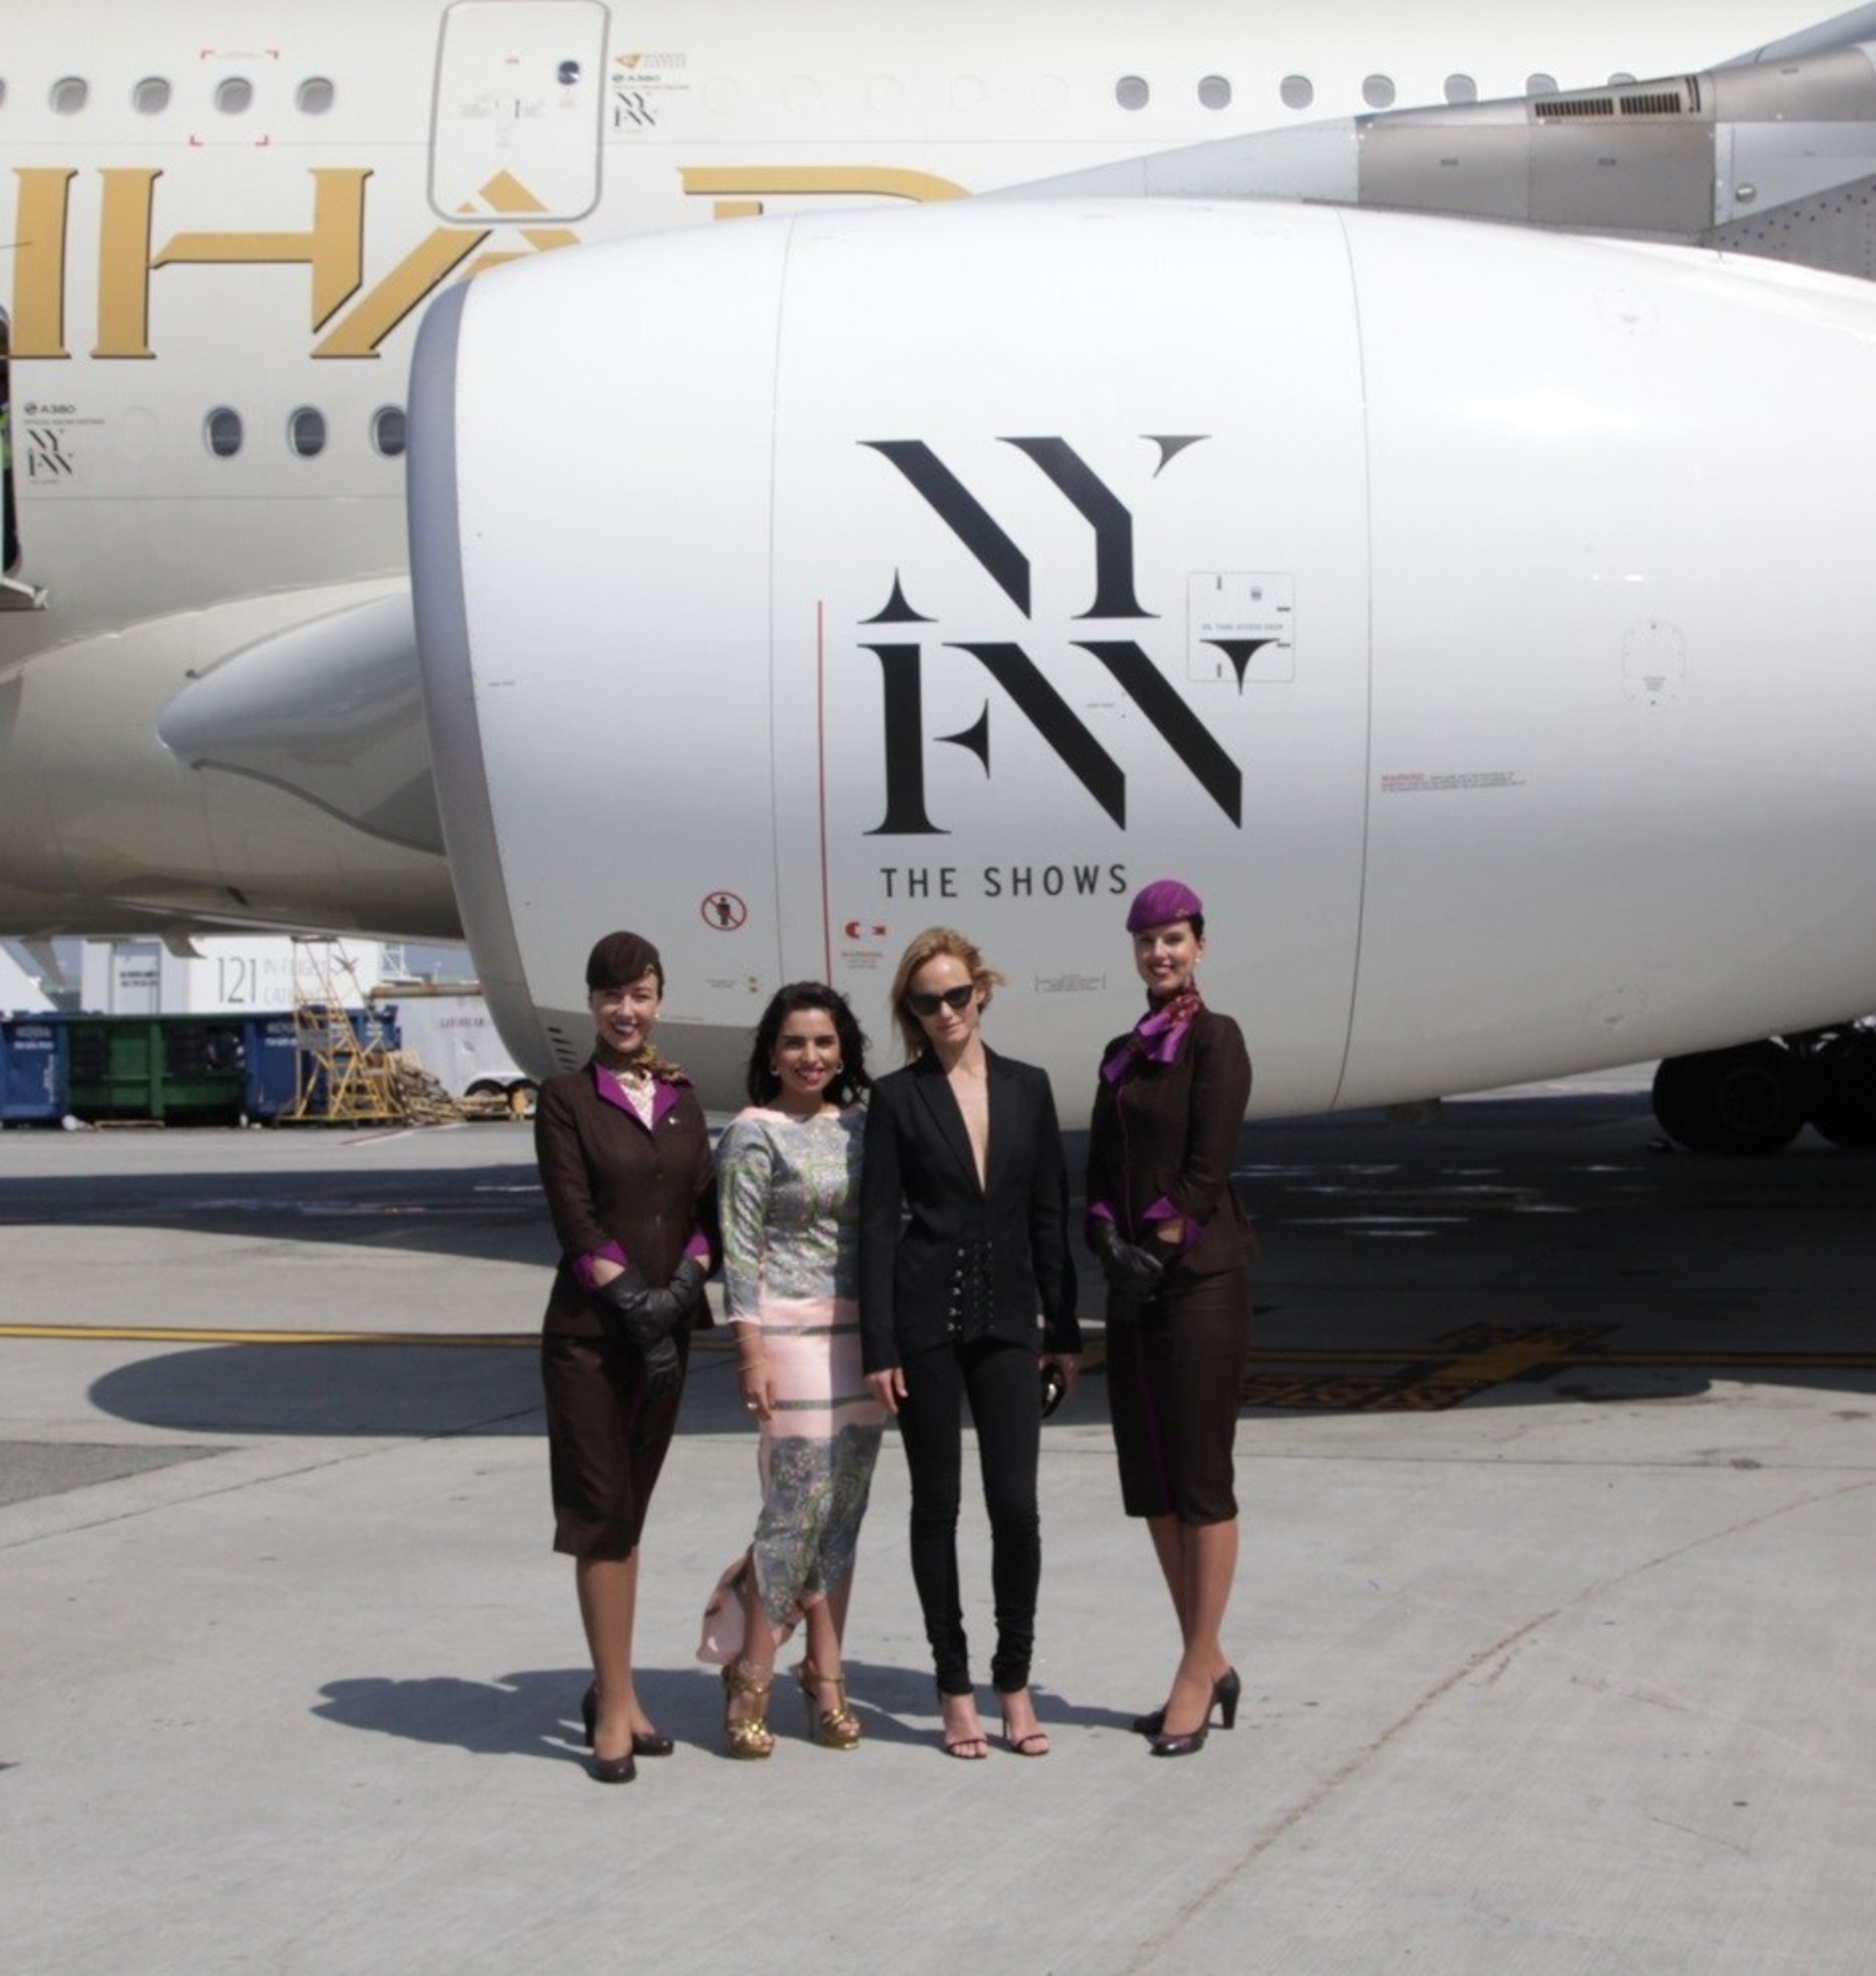 (From left to right flanked by cabin crew) From runway to runway, Amina Taher, Head of Corporate Communications - Etihad Airways and Supermodel Amber Valletta unveil the airline's A380 livery, featuring an "NYFW: The Shows"- branded logo on the aircraft engines and doors at JFK International Airport.